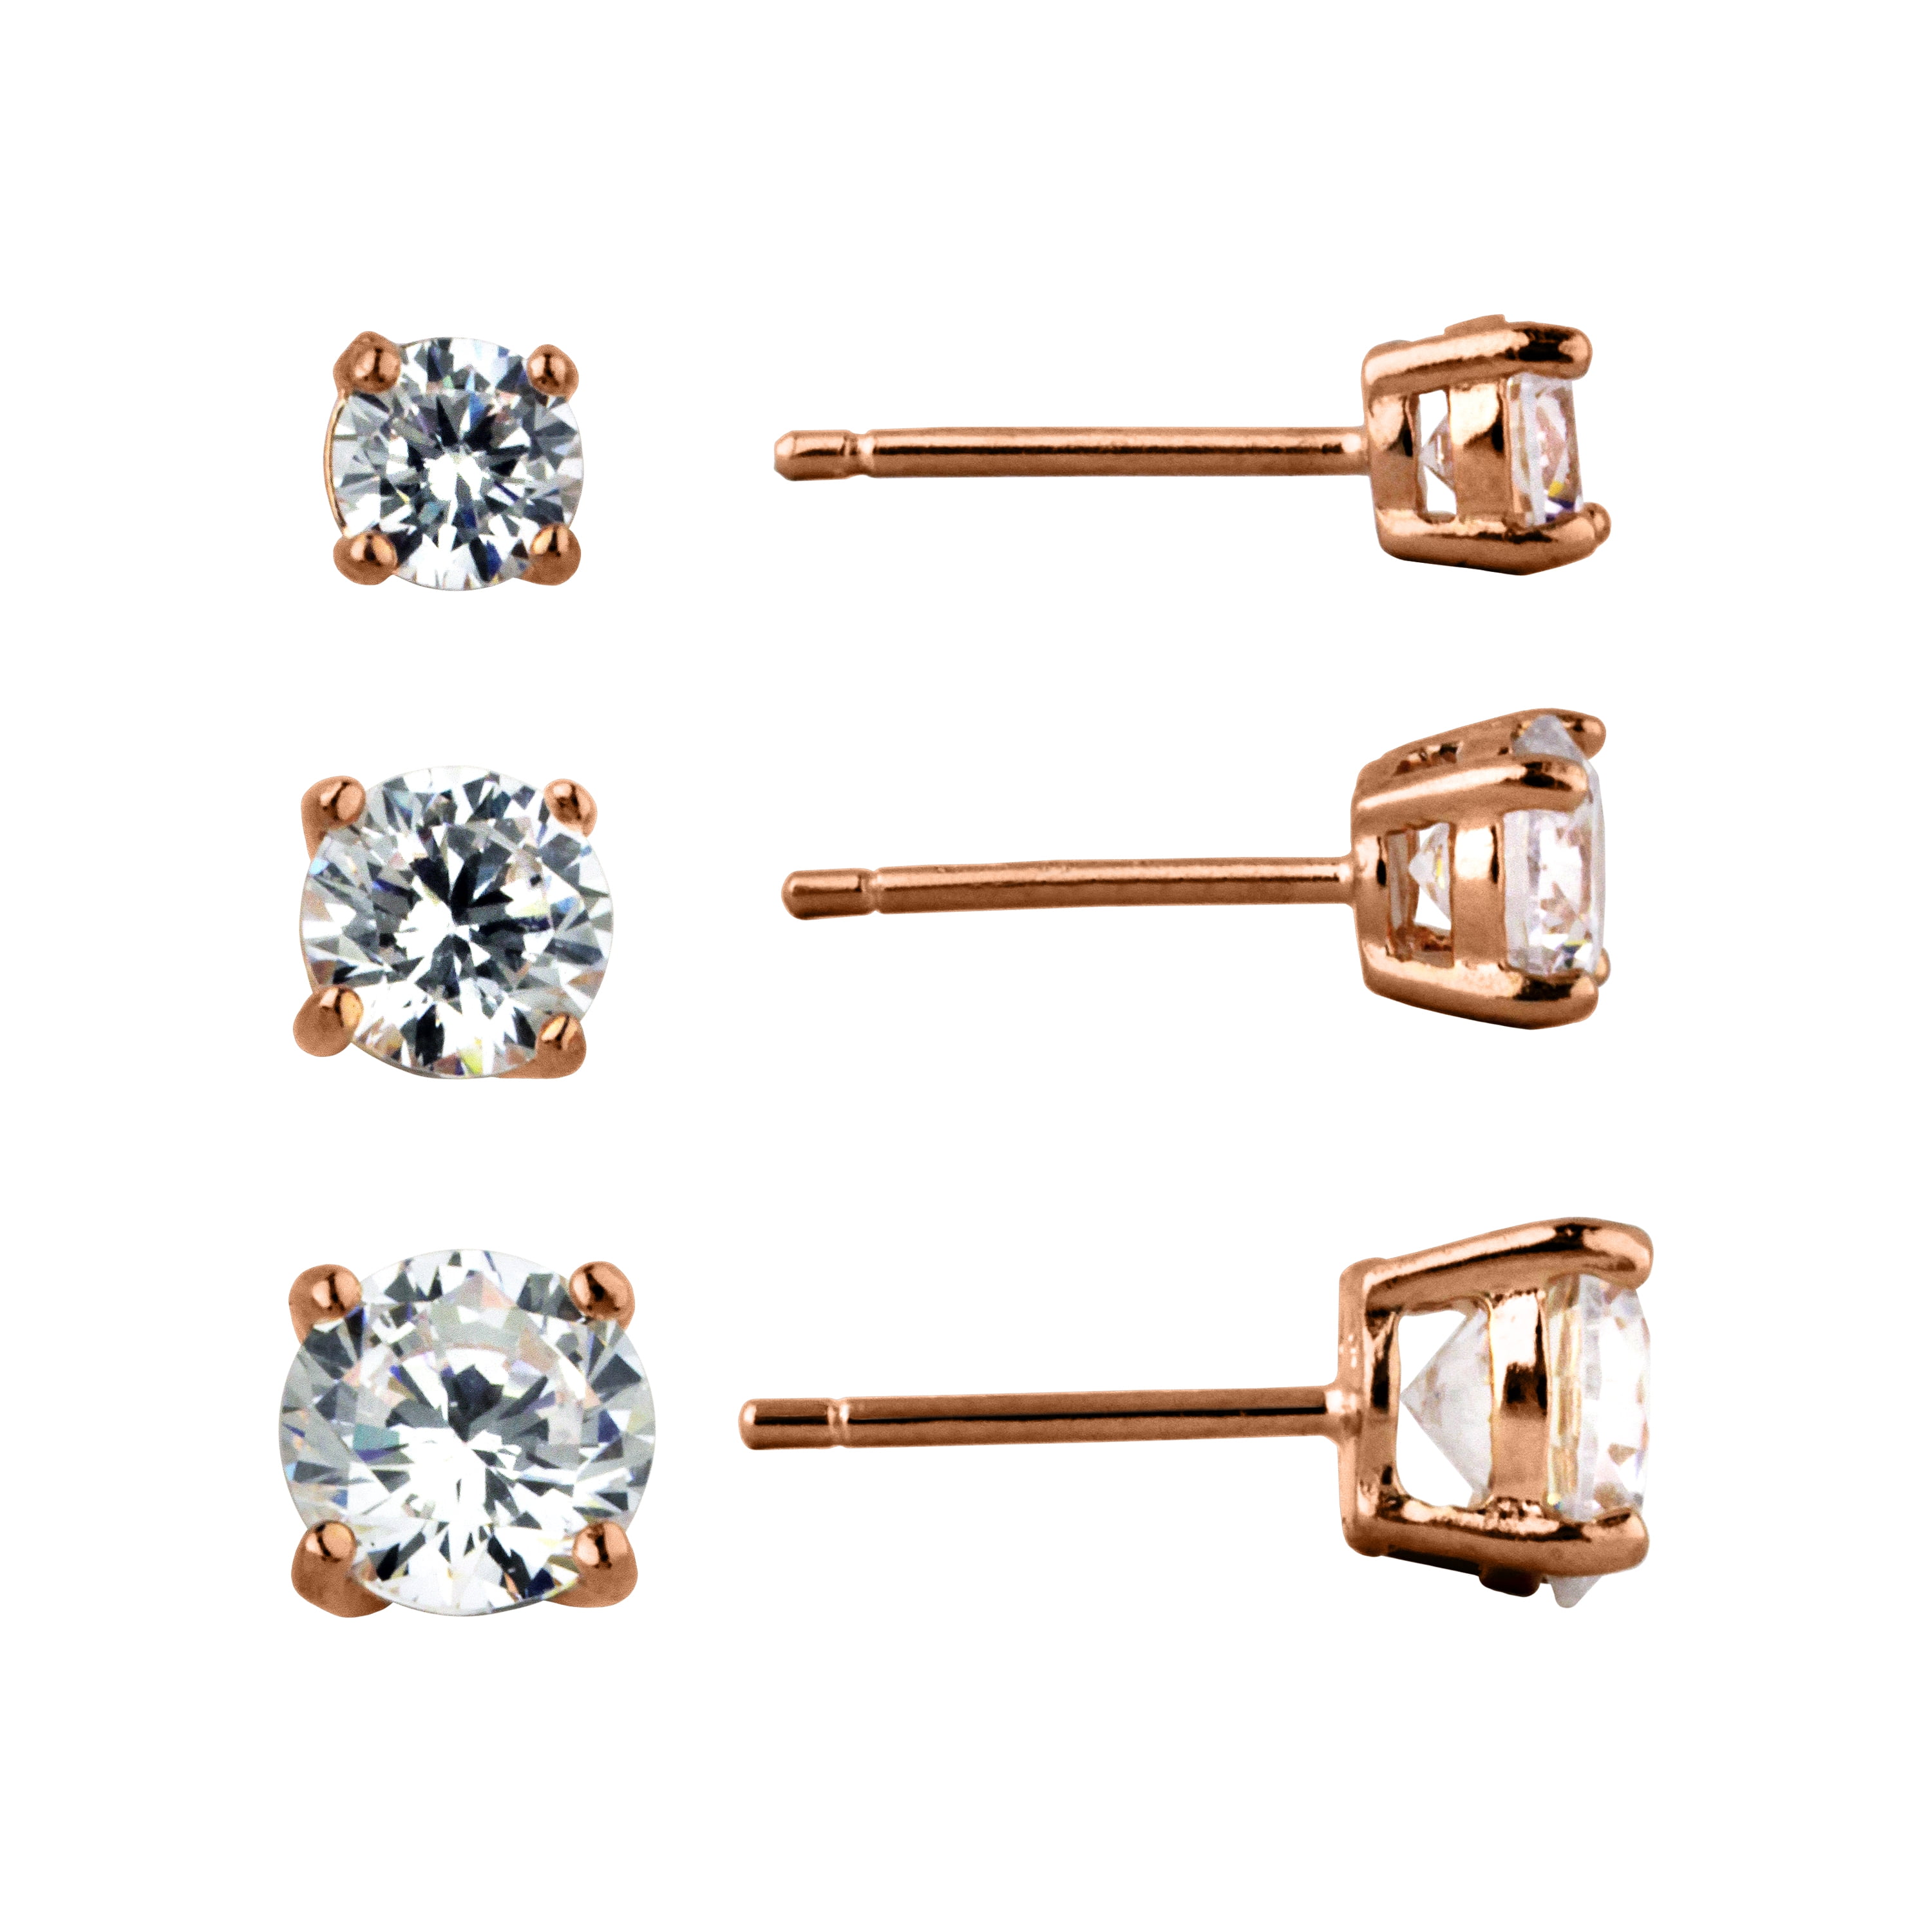 Brilliance Fine Jewelry 14K Rose Gold Plated over Silver Trio Simulated Diamond Earring Set